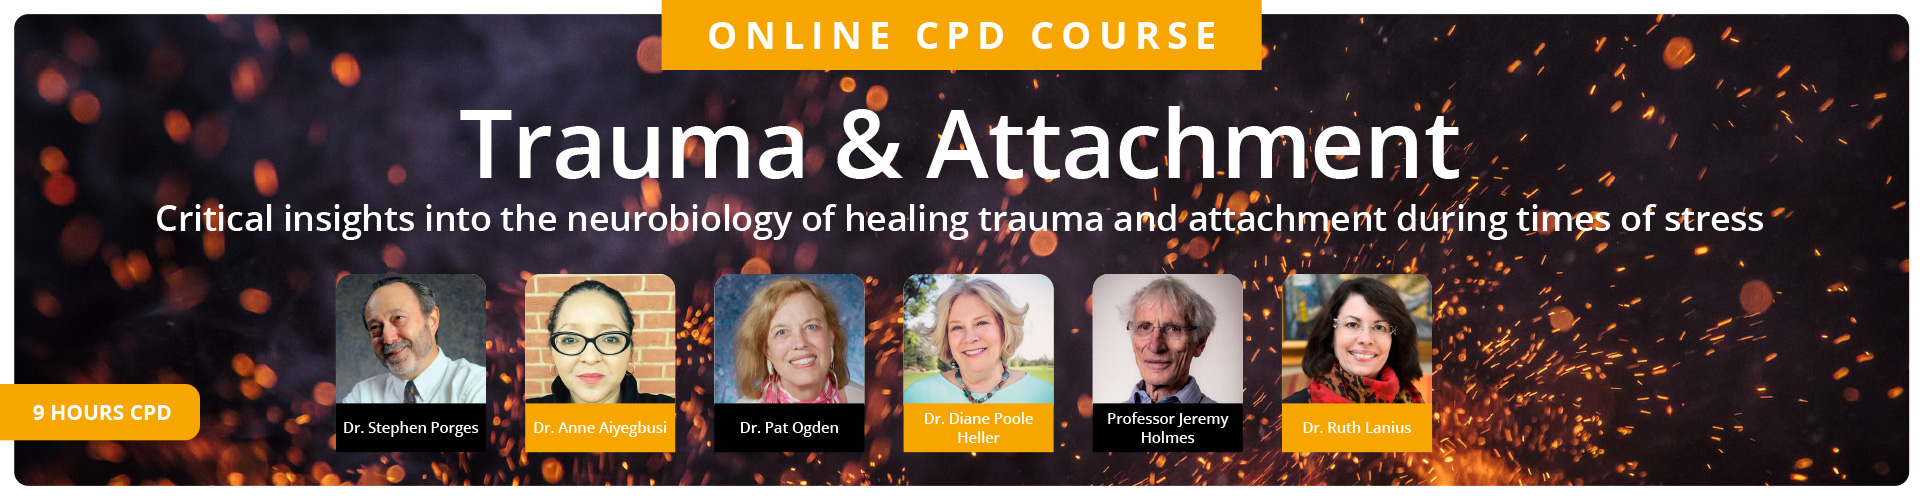 Trauma & Attachment: Critical insights into the neurobiology of healing trauma and attachment during times of stress 